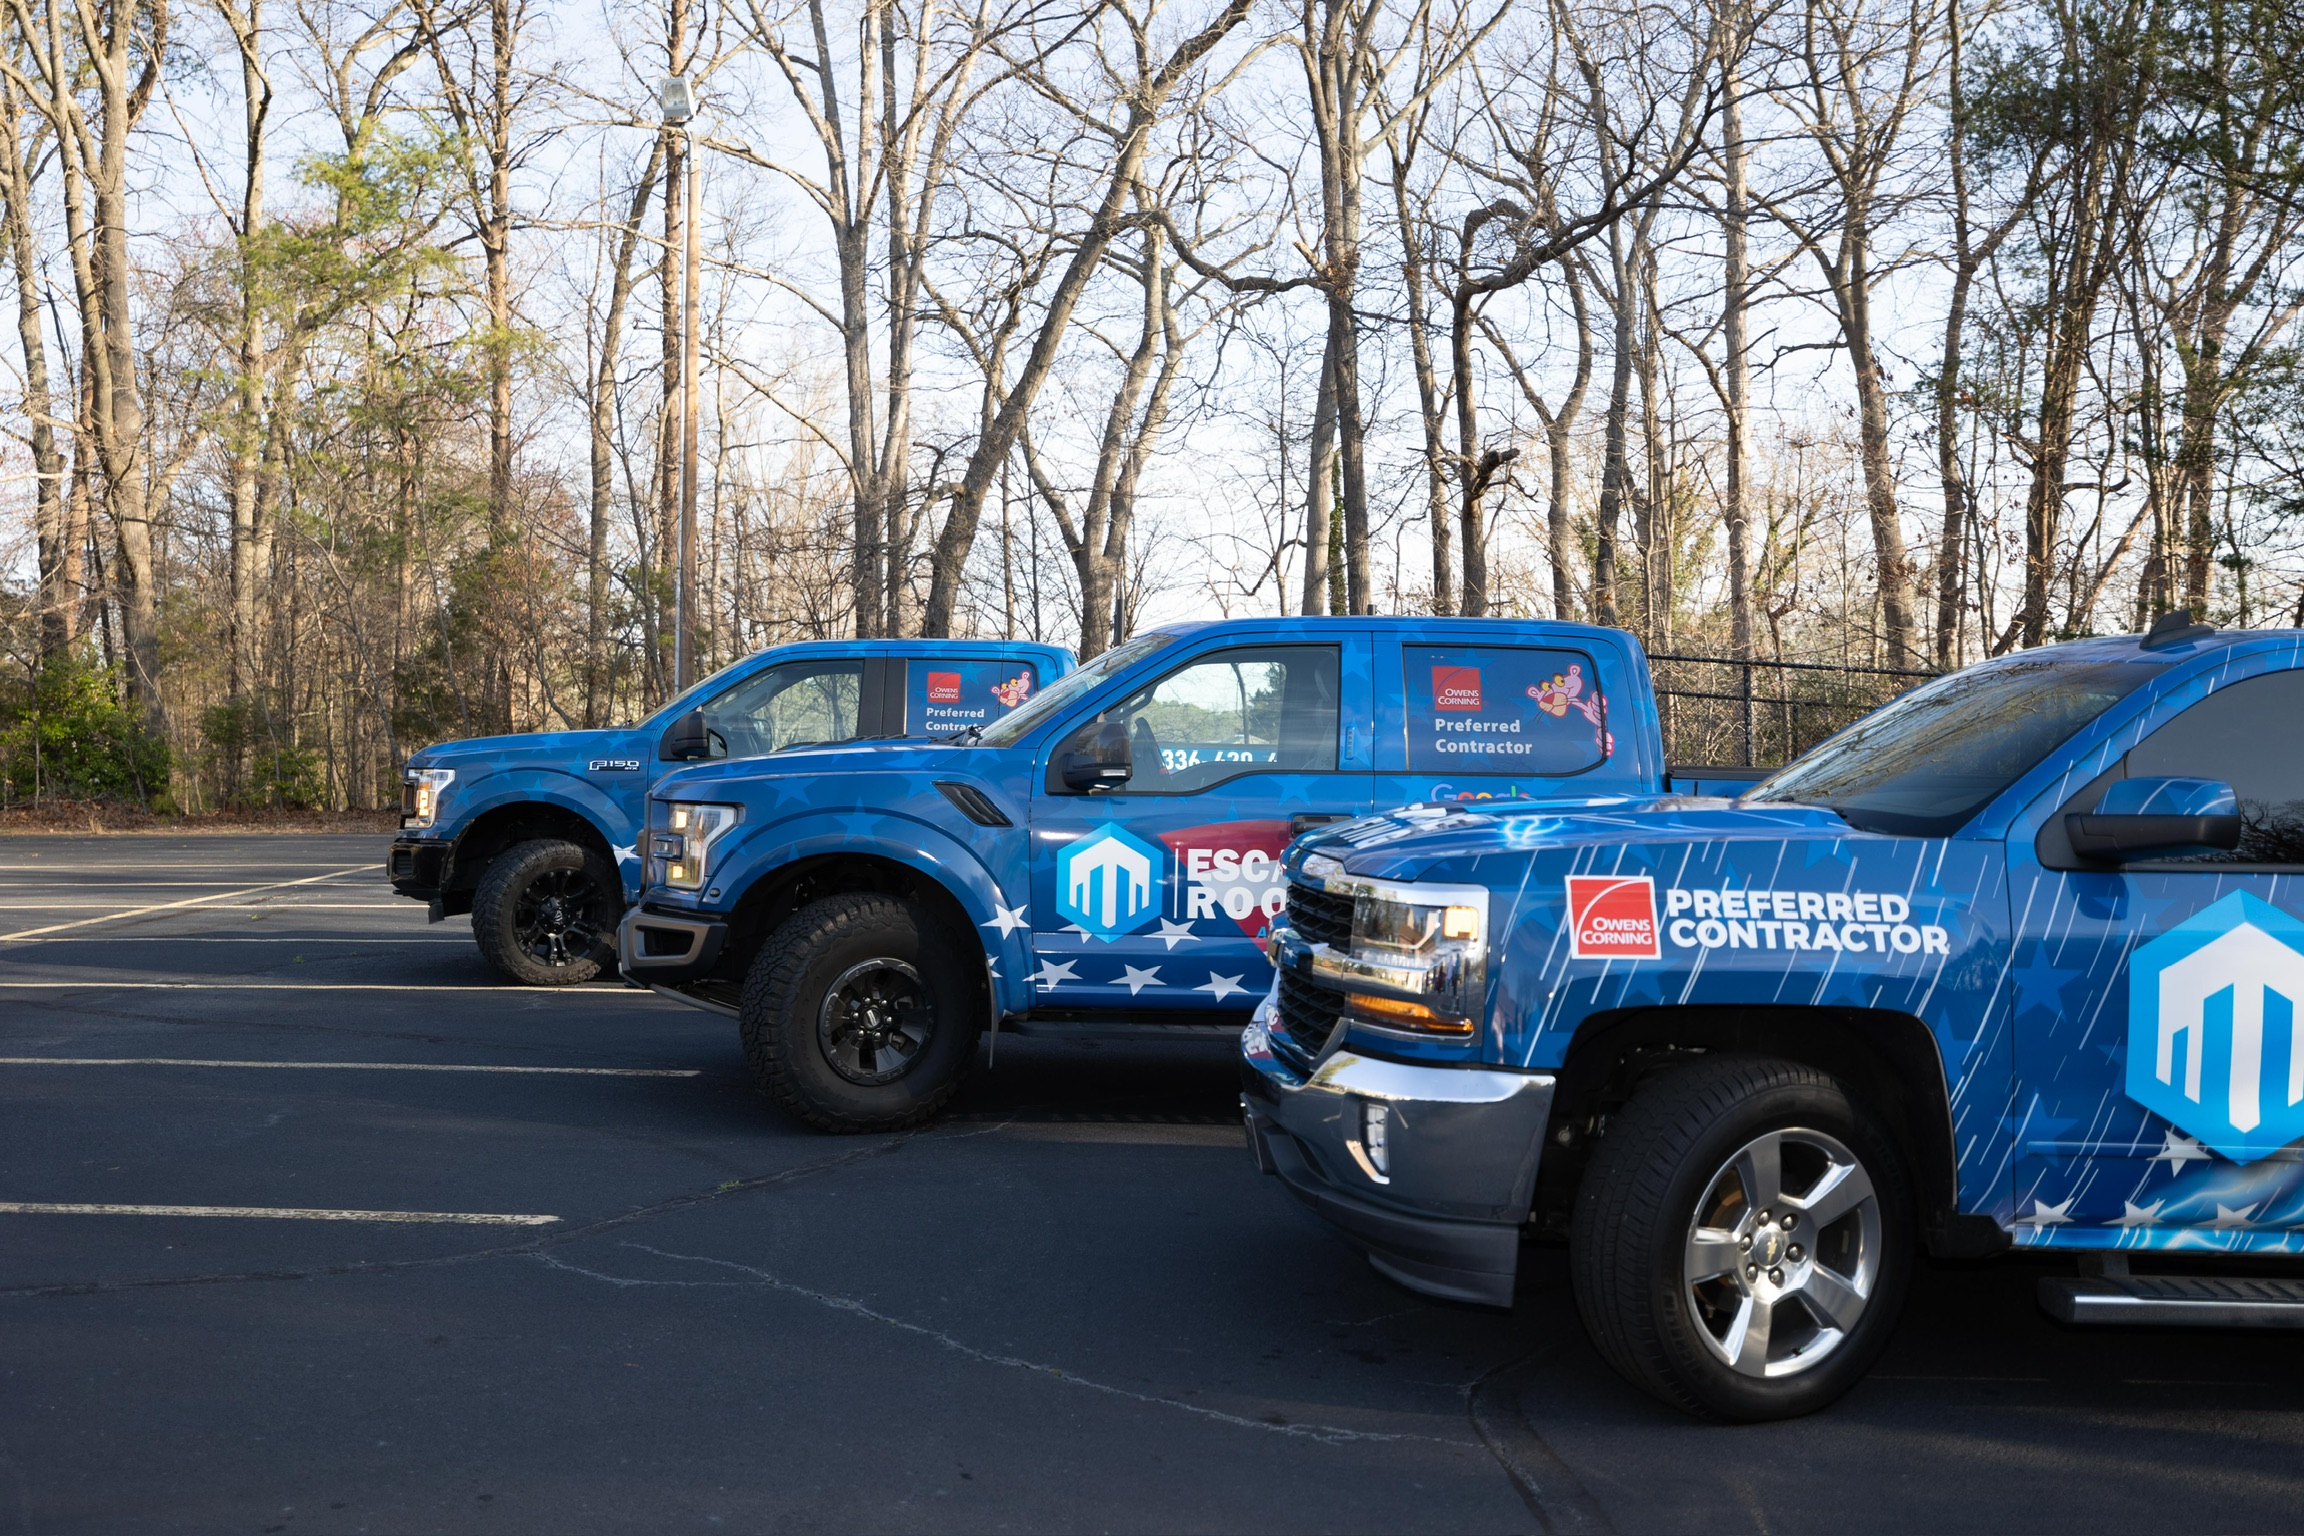 escalade roofing professional roofers trucks team picture greensboro, nc